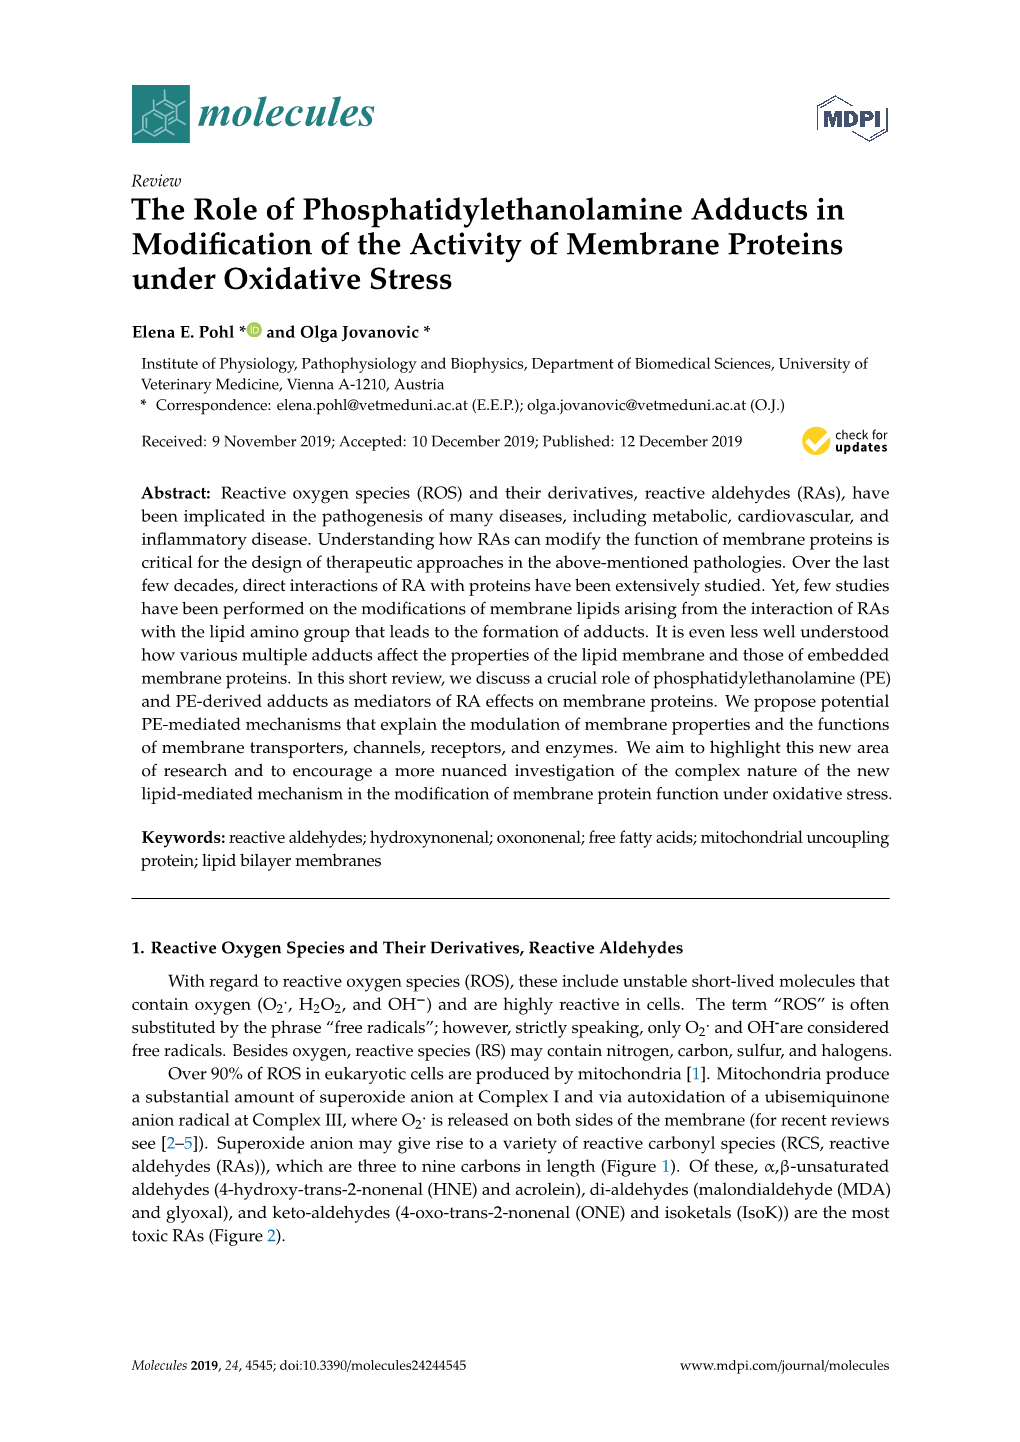 The Role of Phosphatidylethanolamine Adducts in Modiﬁcation of the Activity of Membrane Proteins Under Oxidative Stress